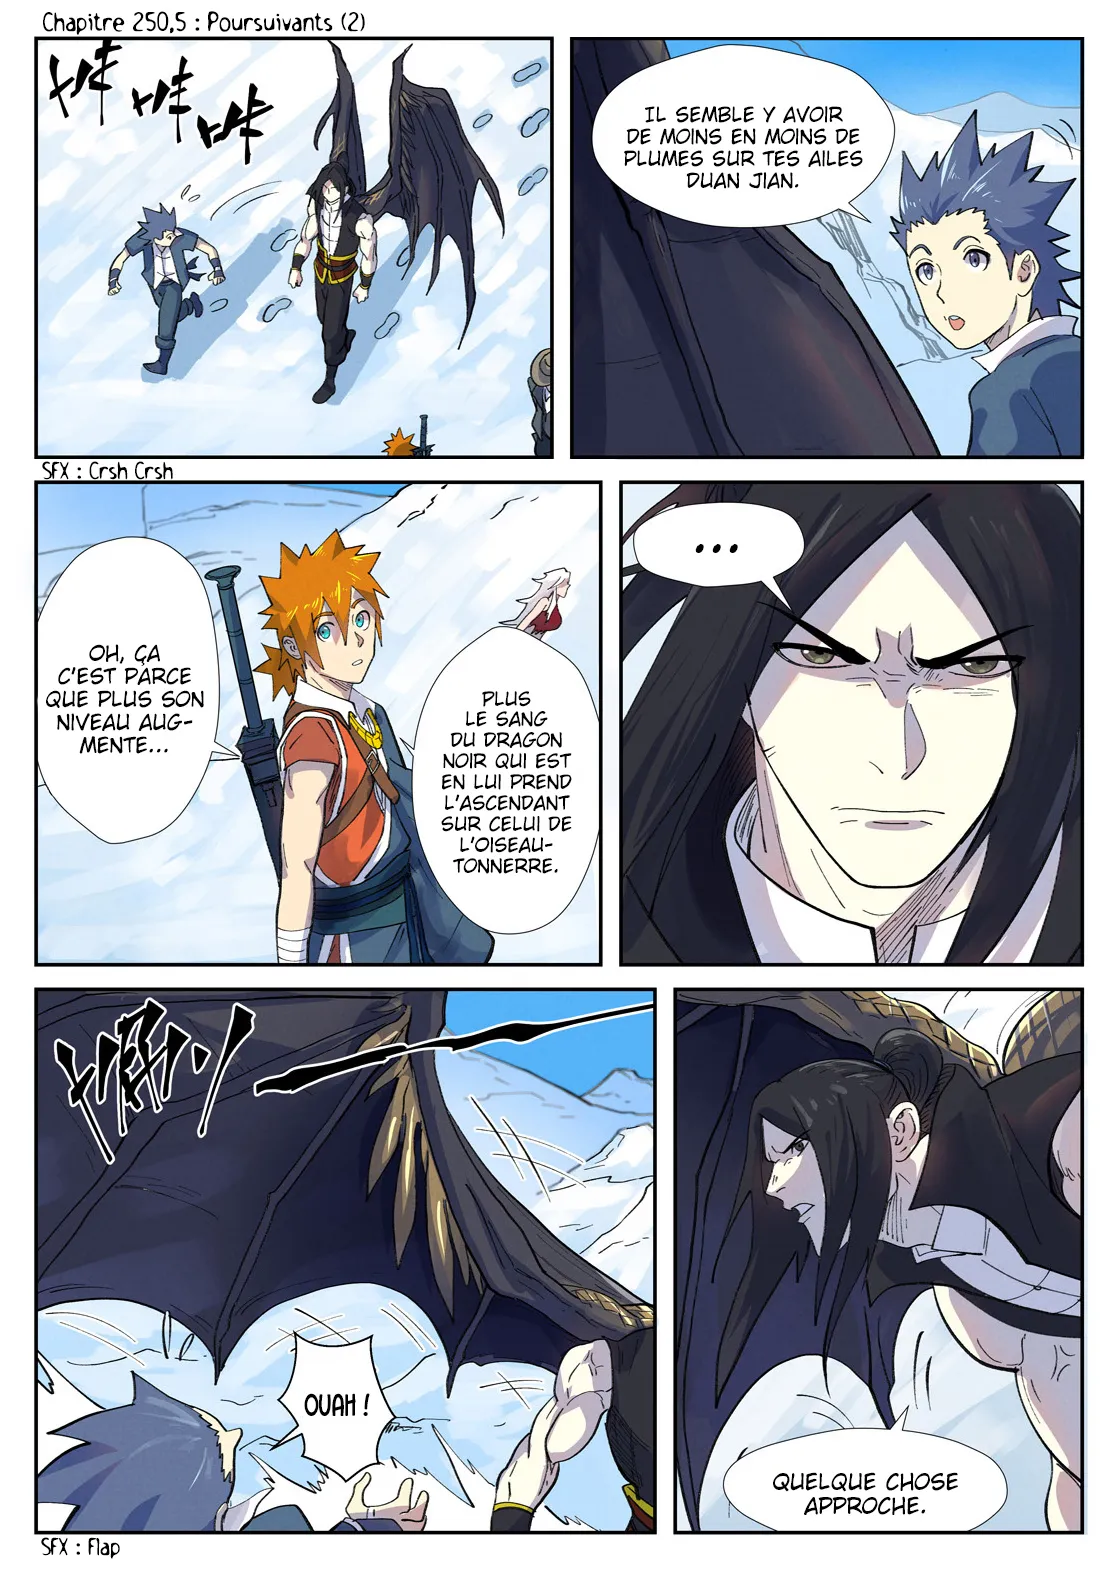 Tales Of Demons And Gods: Chapter chapitre-250.5 - Page 1